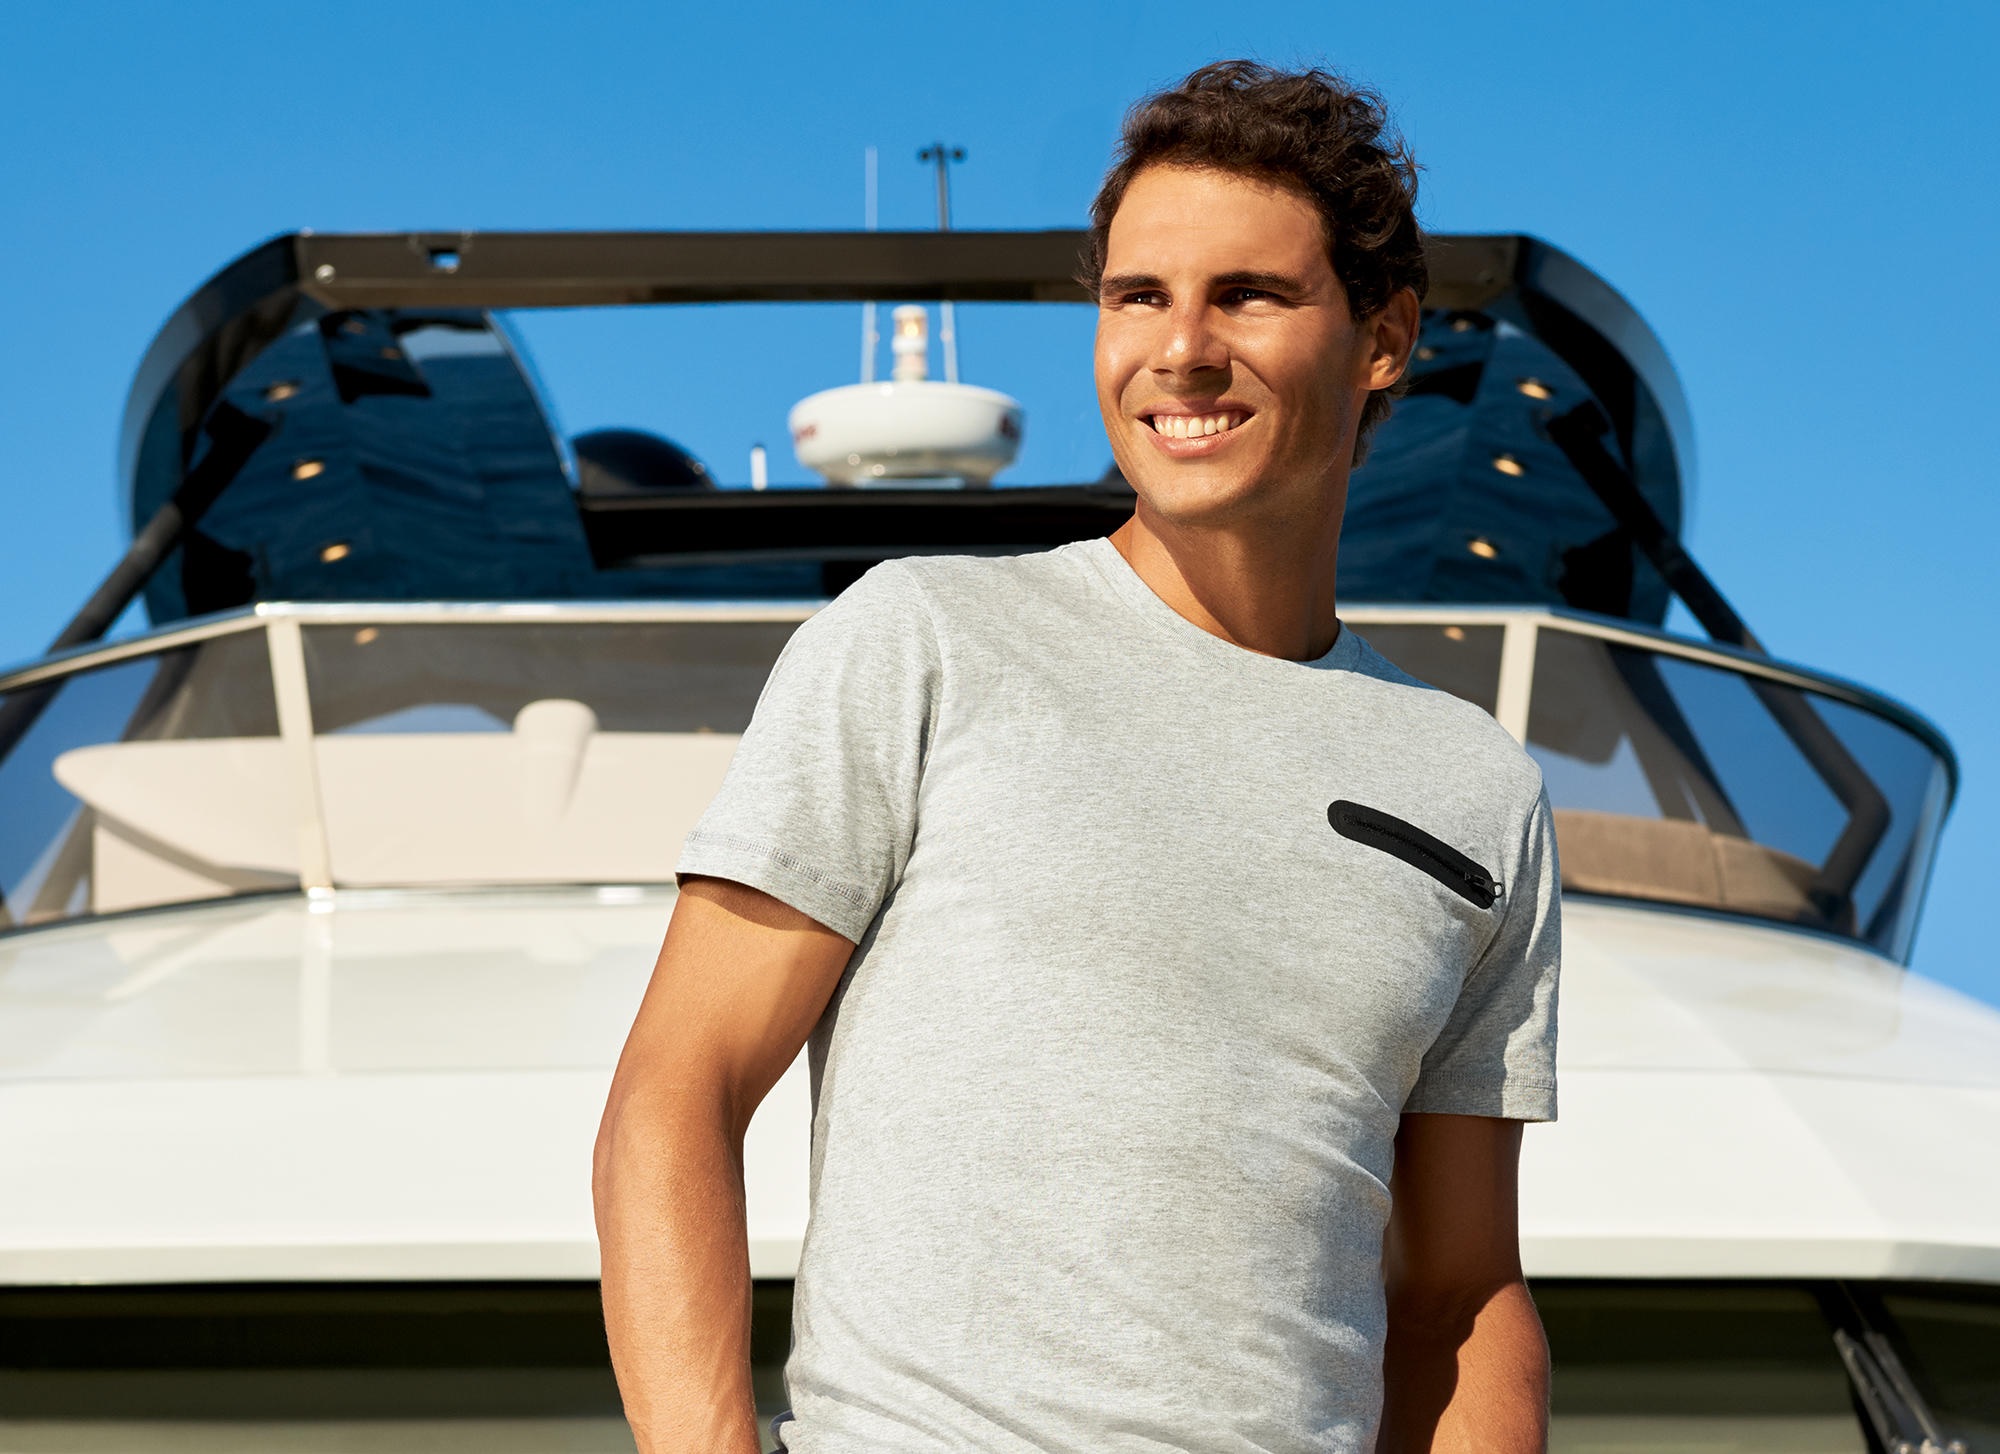 Rafael Nadal enjoys with his friends on a boat 